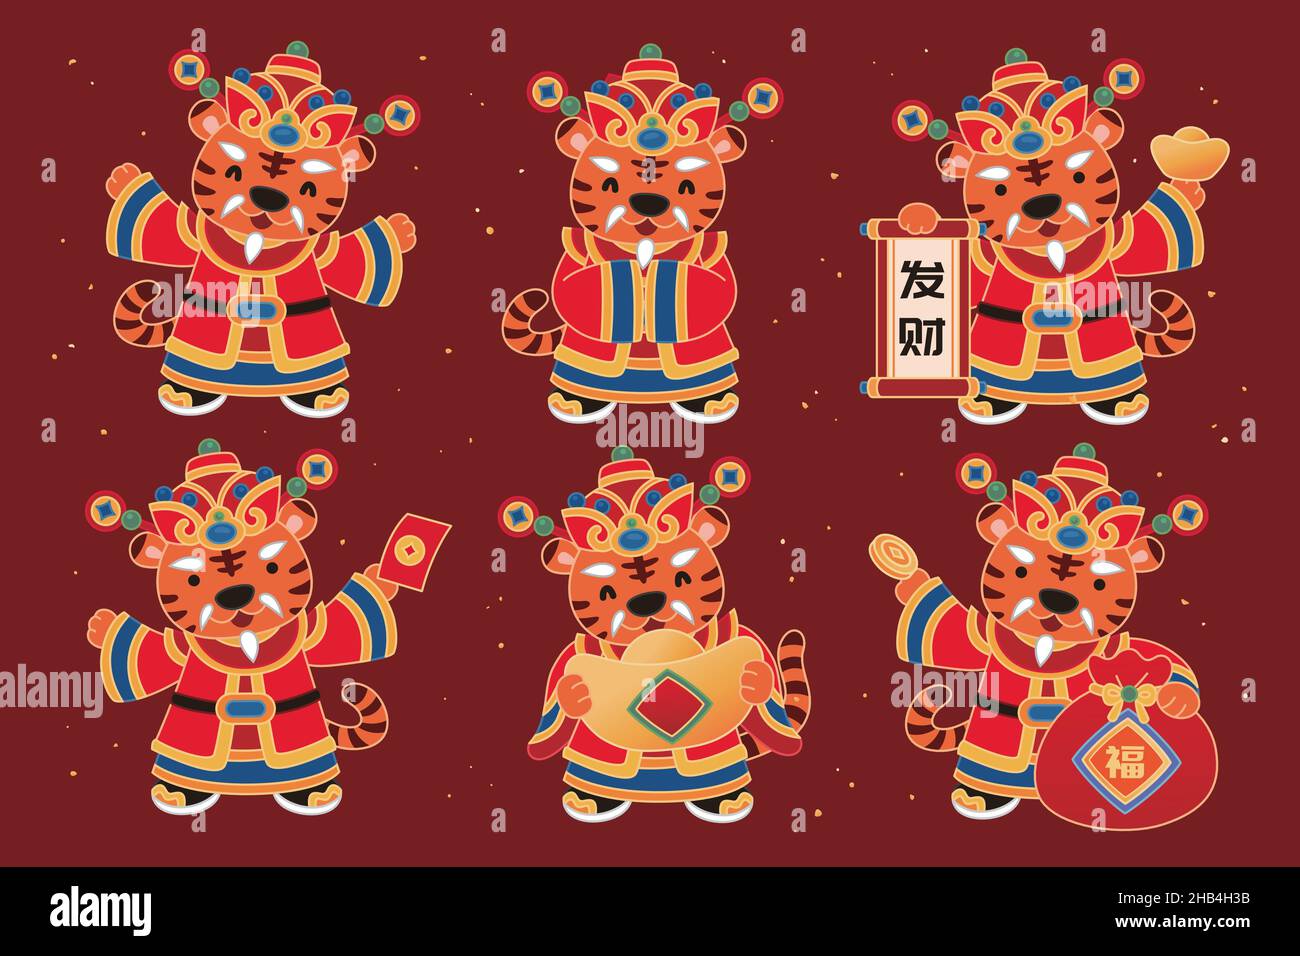 Cute tiger characters in traditional Chinese wealth of god costumes doing various activities. Flat style illustration. Text: Wealthy Stock Vector